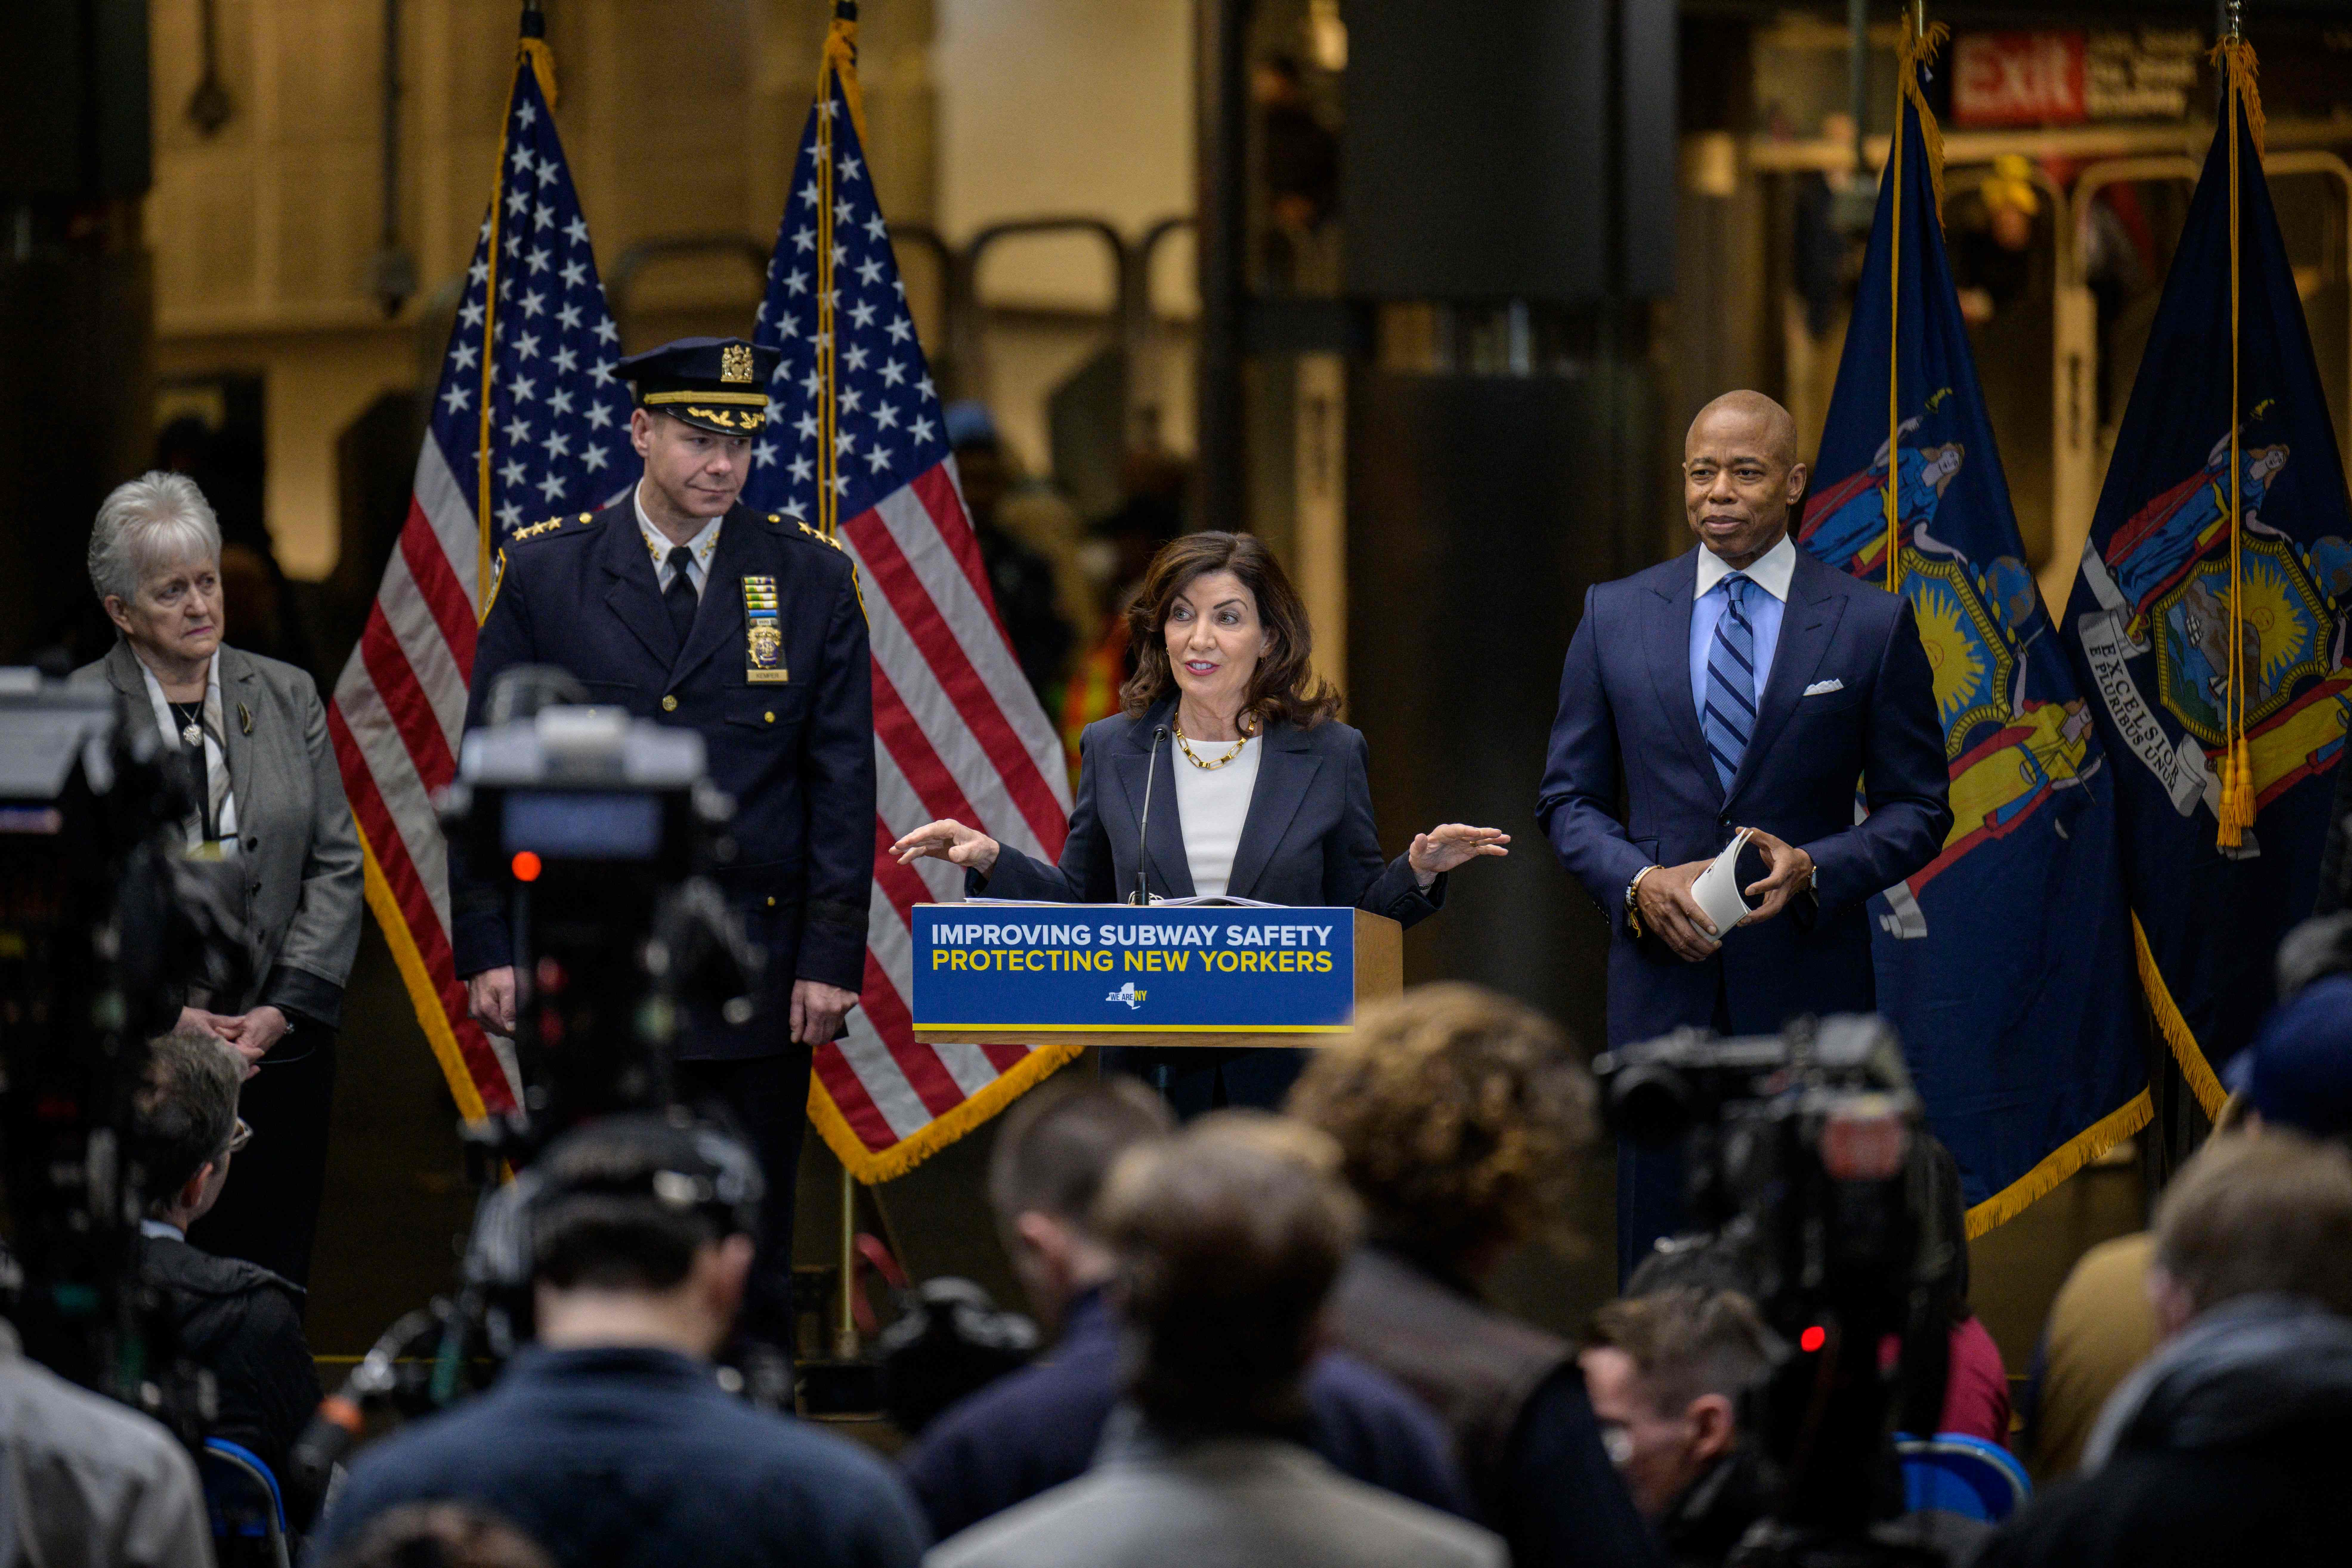 New York Governor Kathy Hochul and New York mayor Eric Adams (R) make an announcement on subway safety during a press conference at Fulton Transit Center on January 27, 2023 in New York. (Photo by ANGELA WEISS/AFP via Getty Images)